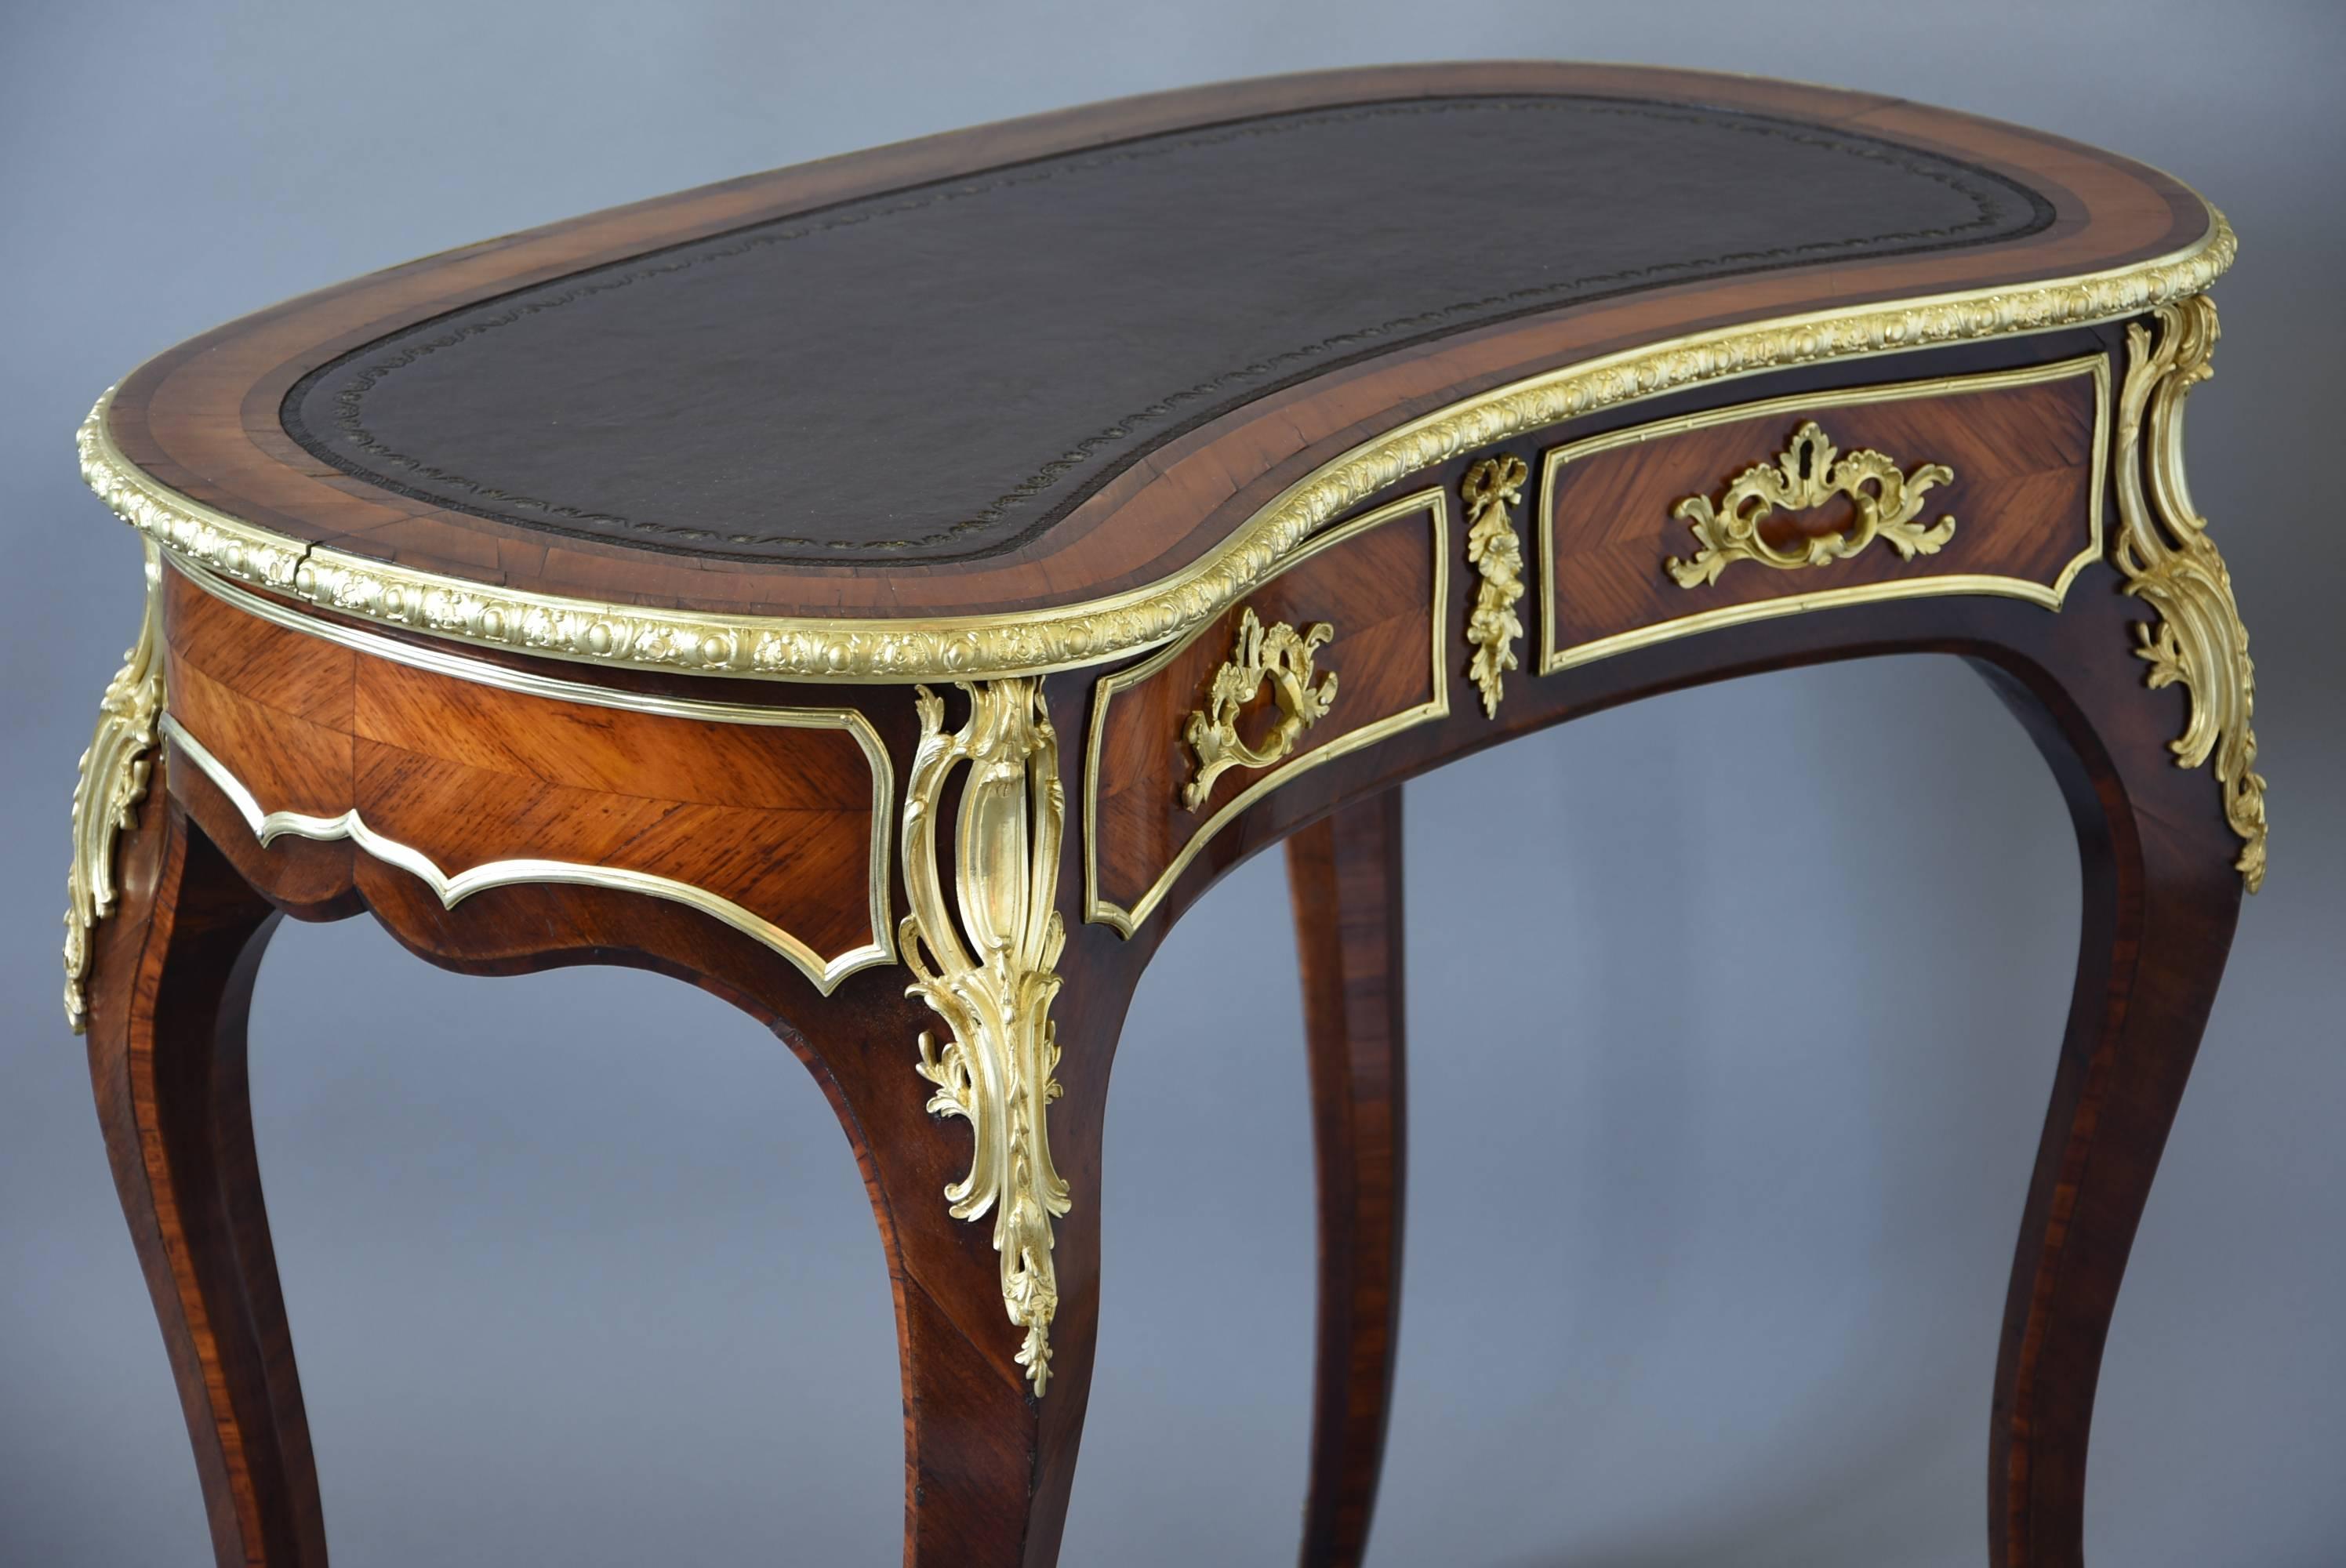 Late 19th Century 19th Century Kingwood Freestanding Kidney Shaped Ladies Writing Table For Sale